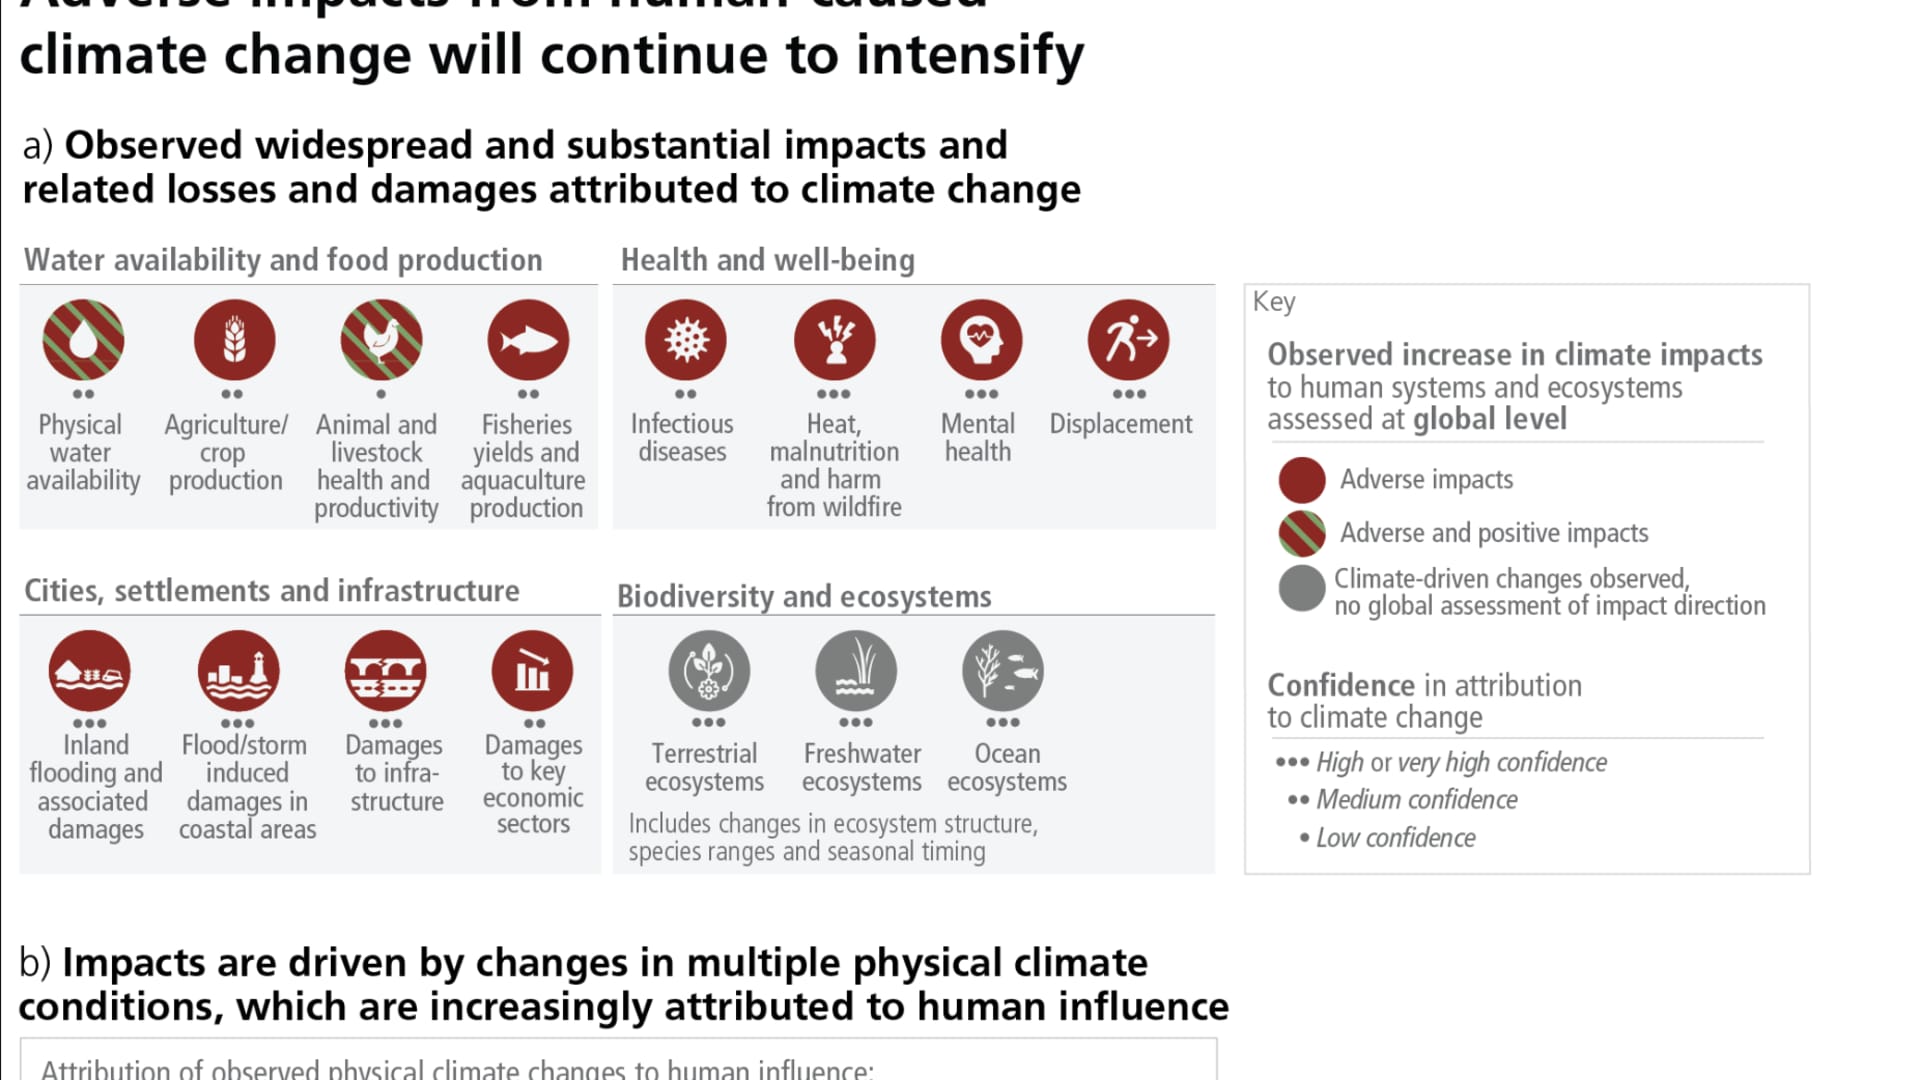 This chart shows the various impacts climate change has on water availability, food production, health and well-being, cities and infrastructure and biodiversity and ecosystems. Chart is from the Intergovernmental Panel on Climate Change (IPCC) Sixth Assessment Report.